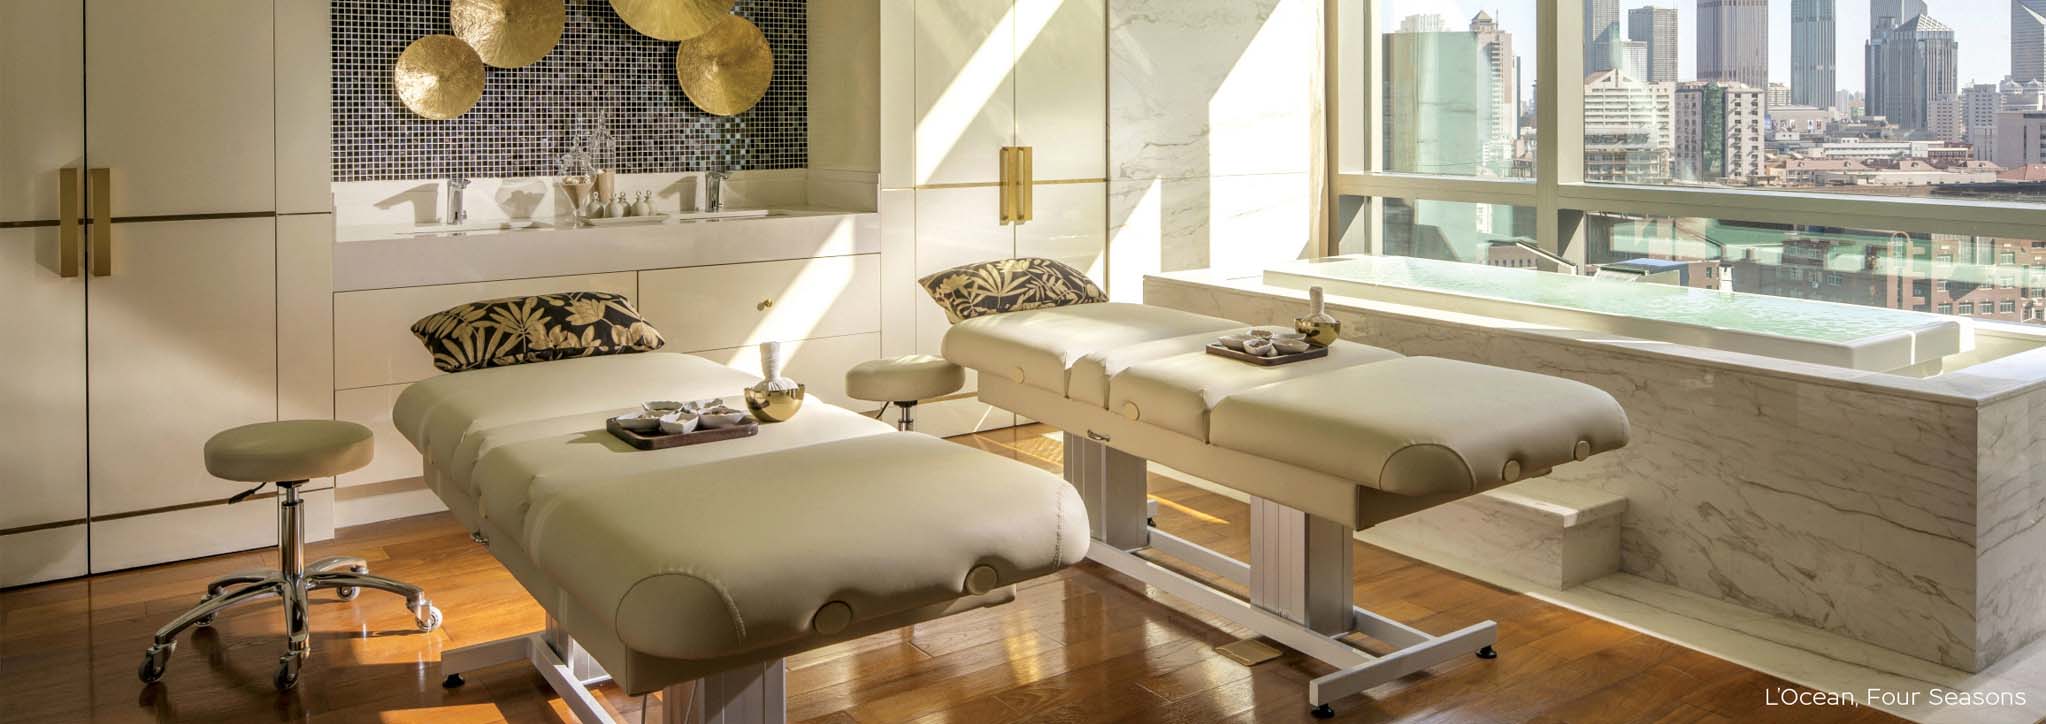 Massage Therapy Tables